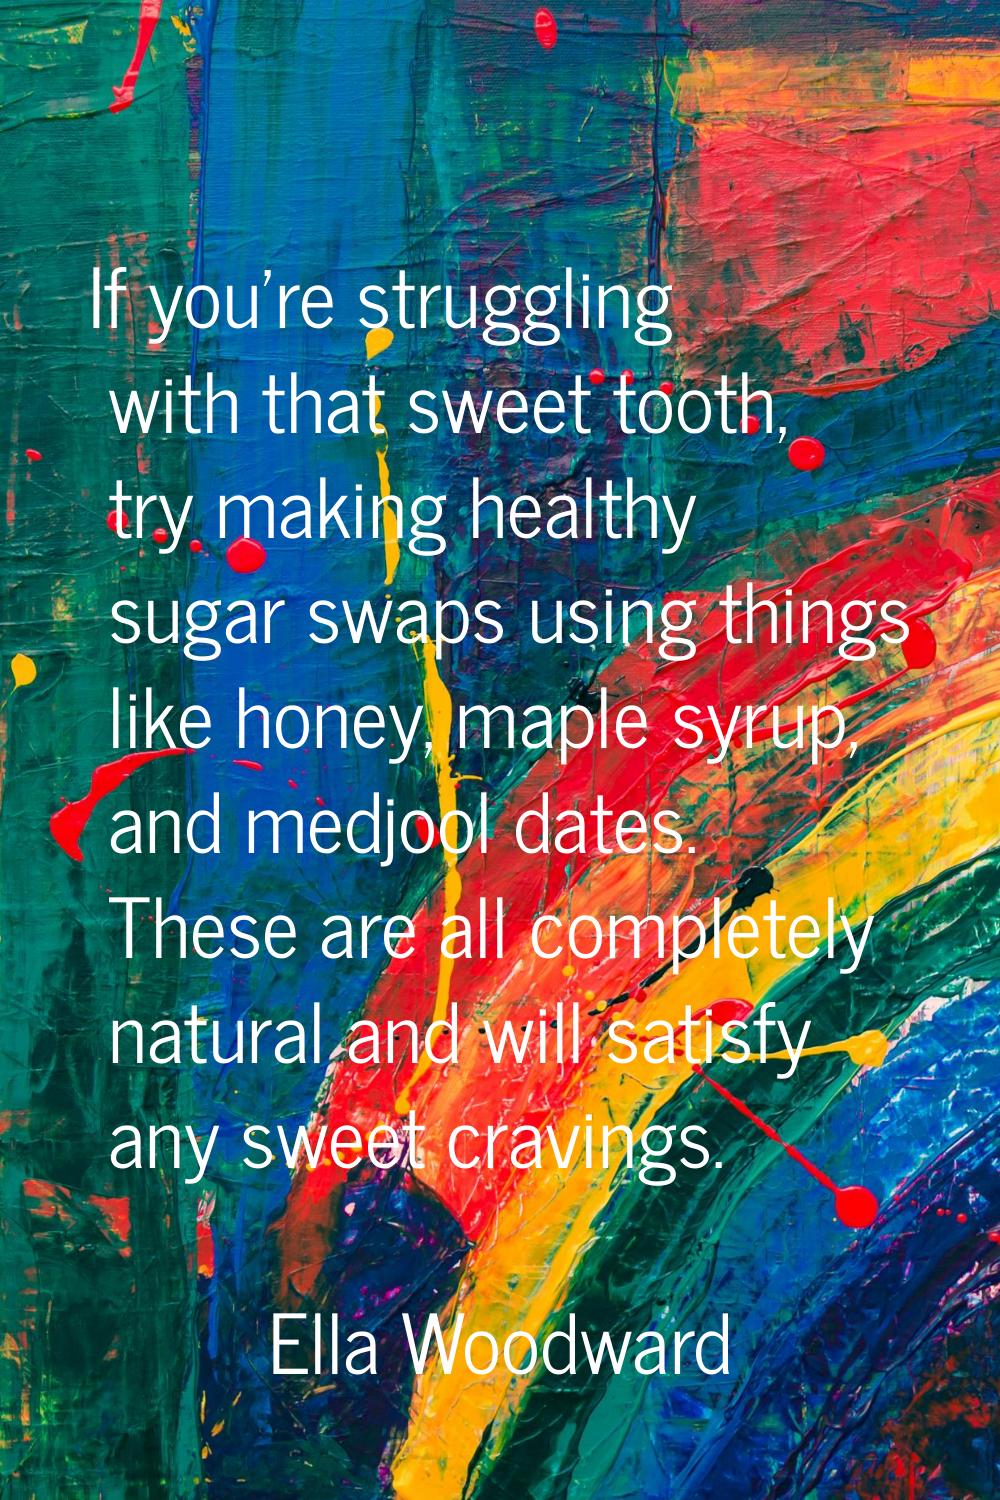 If you're struggling with that sweet tooth, try making healthy sugar swaps using things like honey,